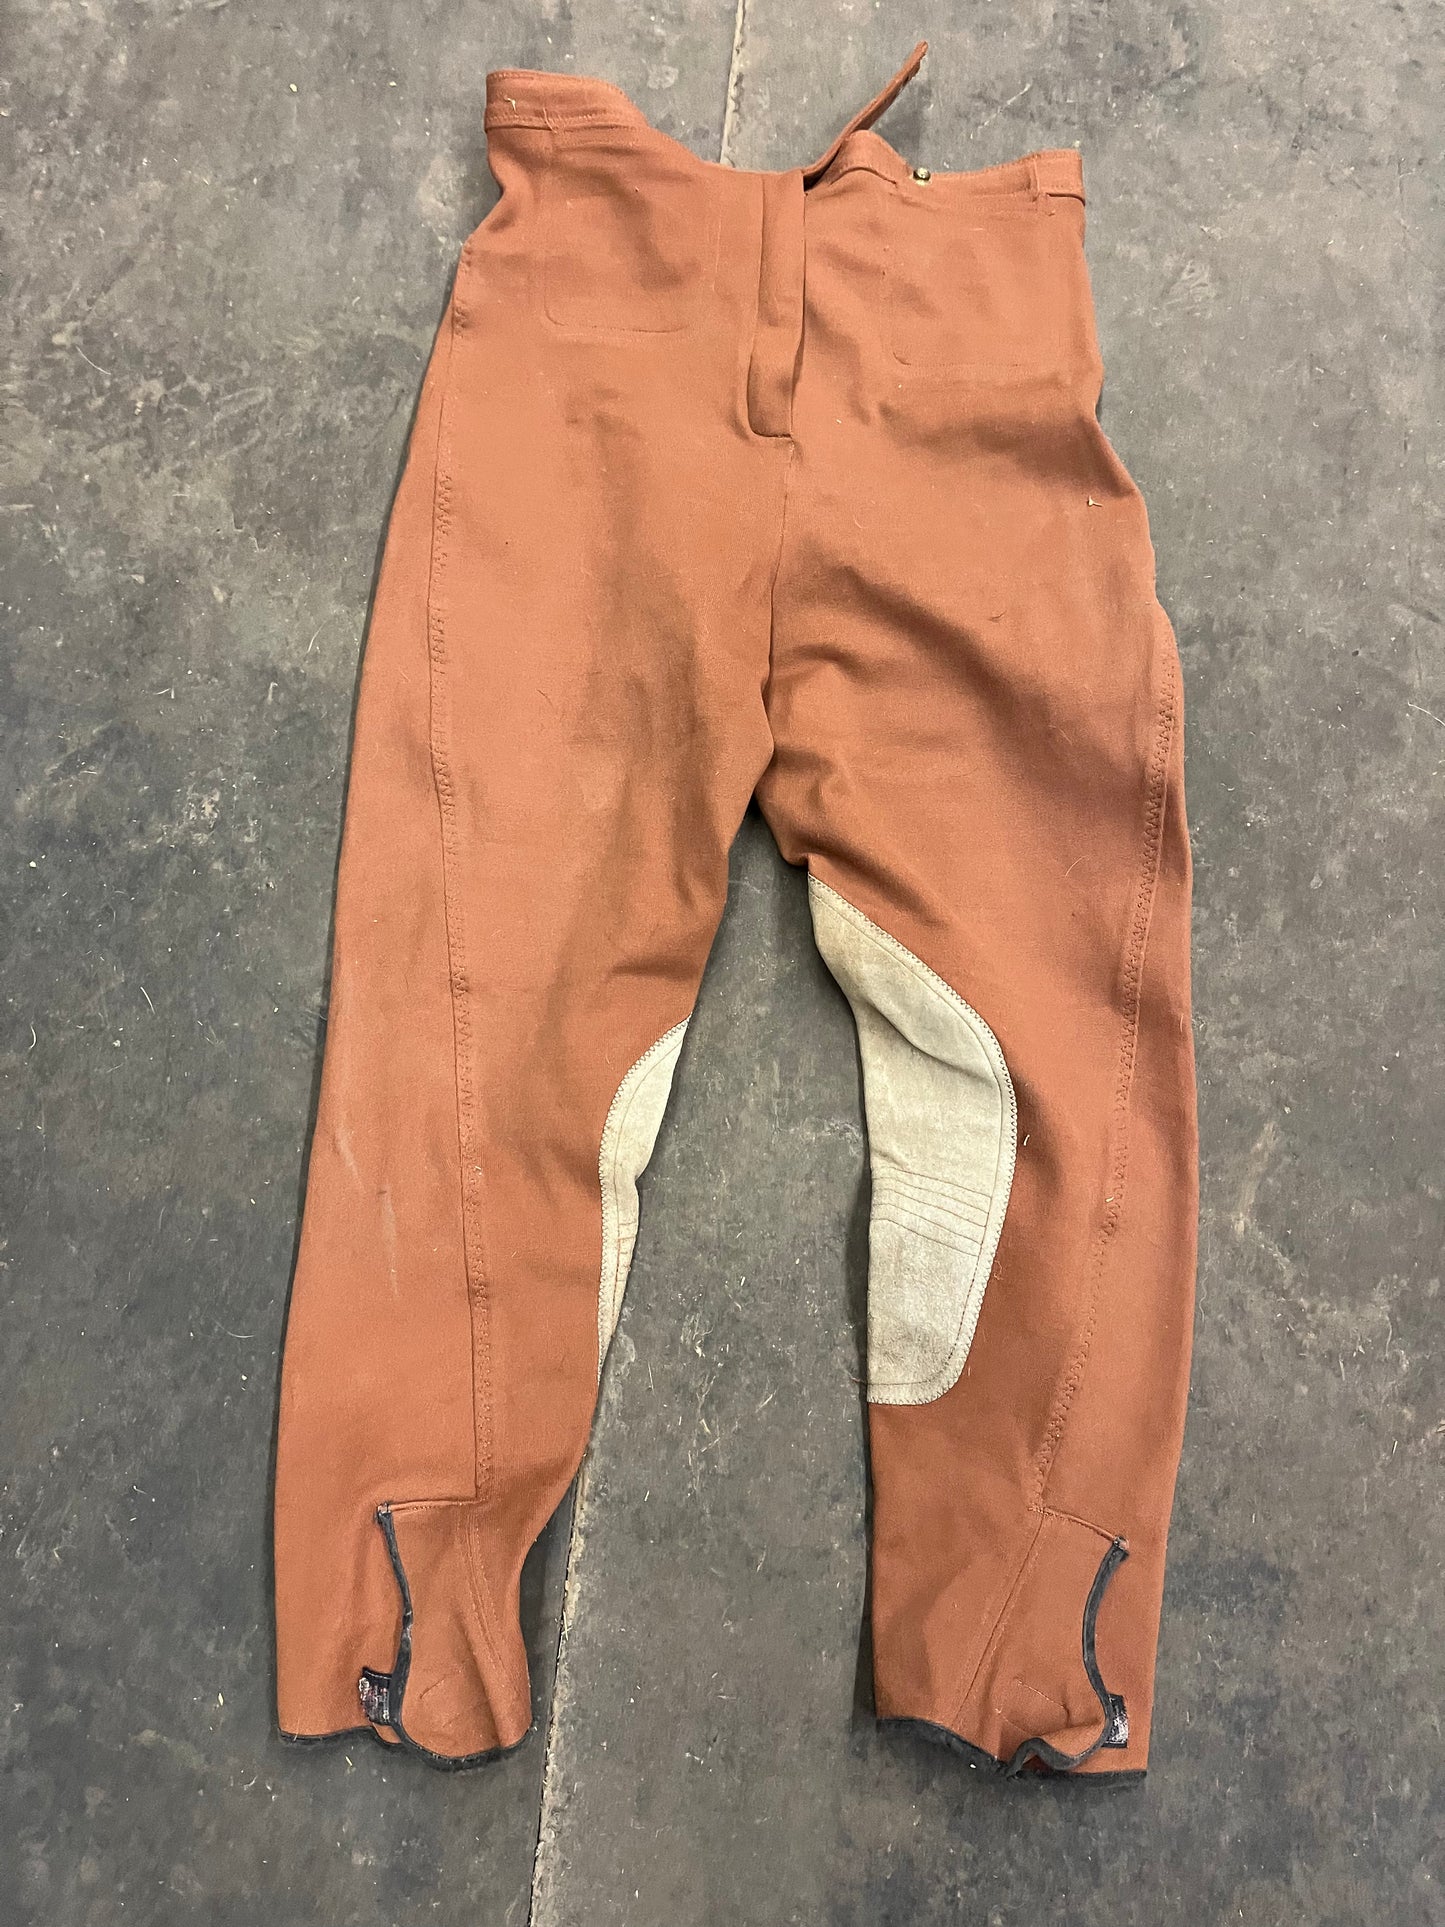 Breeches used